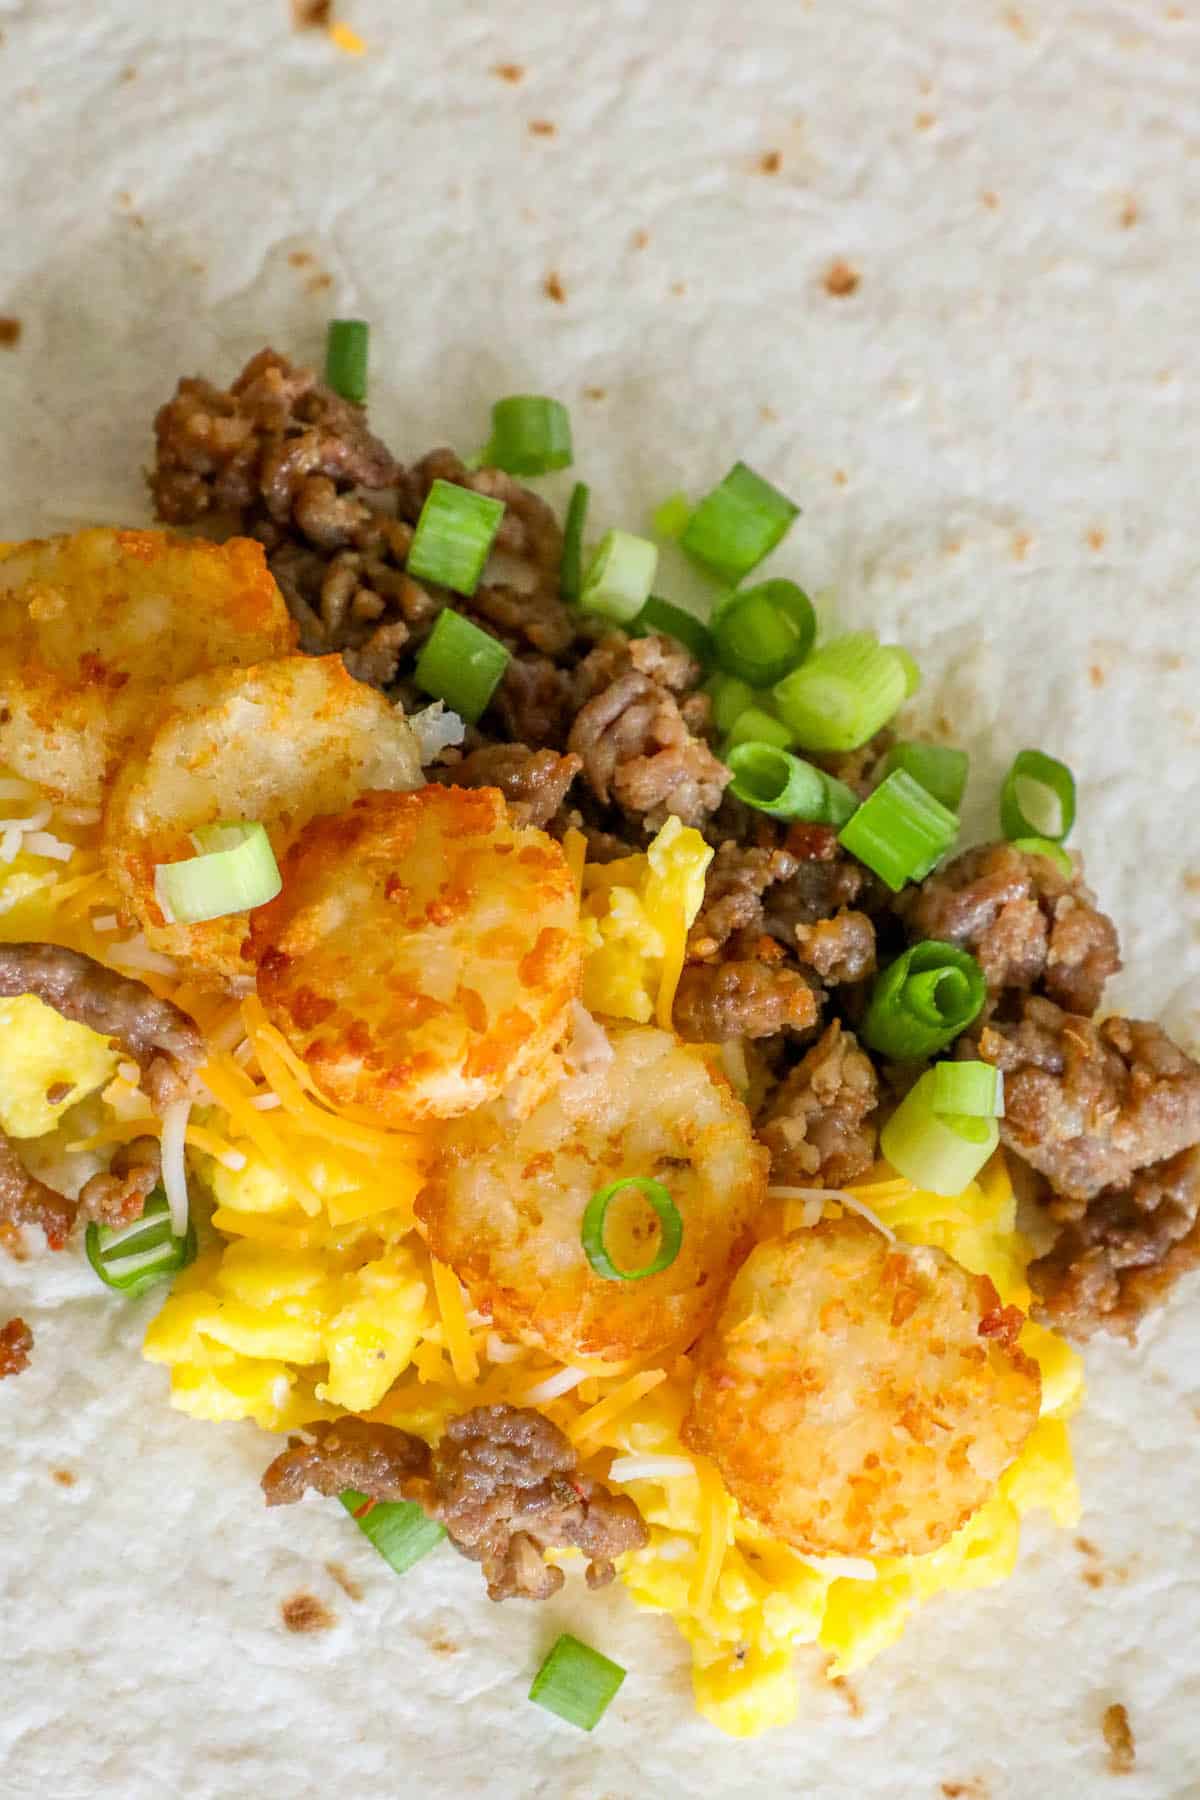 A freezer breakfast burrito with eggs, sausage, and green onions.